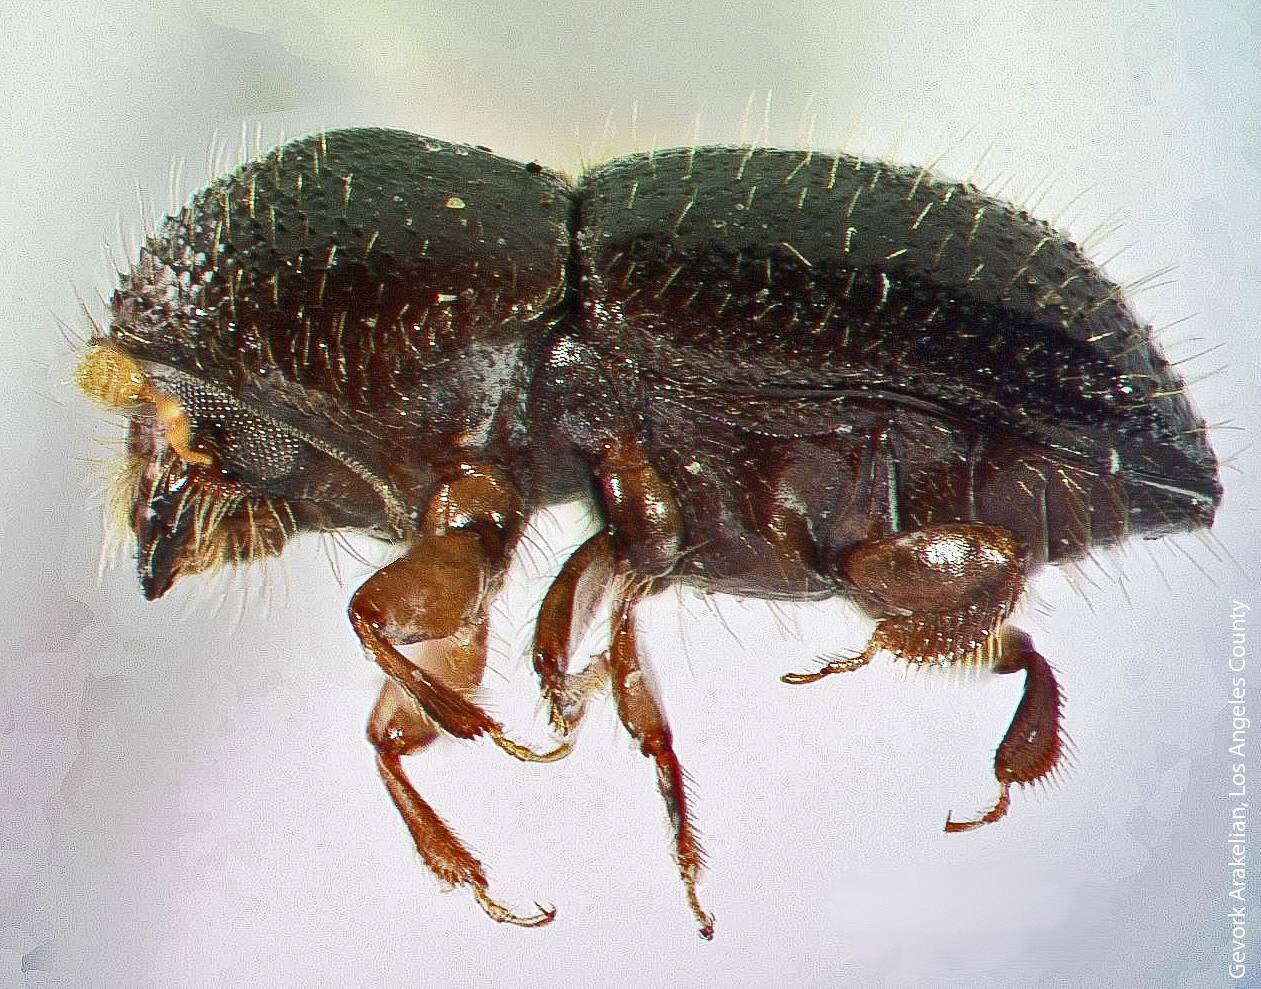 UC Riverside scientists are researching control measures for the polyphagous shot hole borer, an invasive beetle from Asia that bores into trees and transmits a pathogenic fungus.